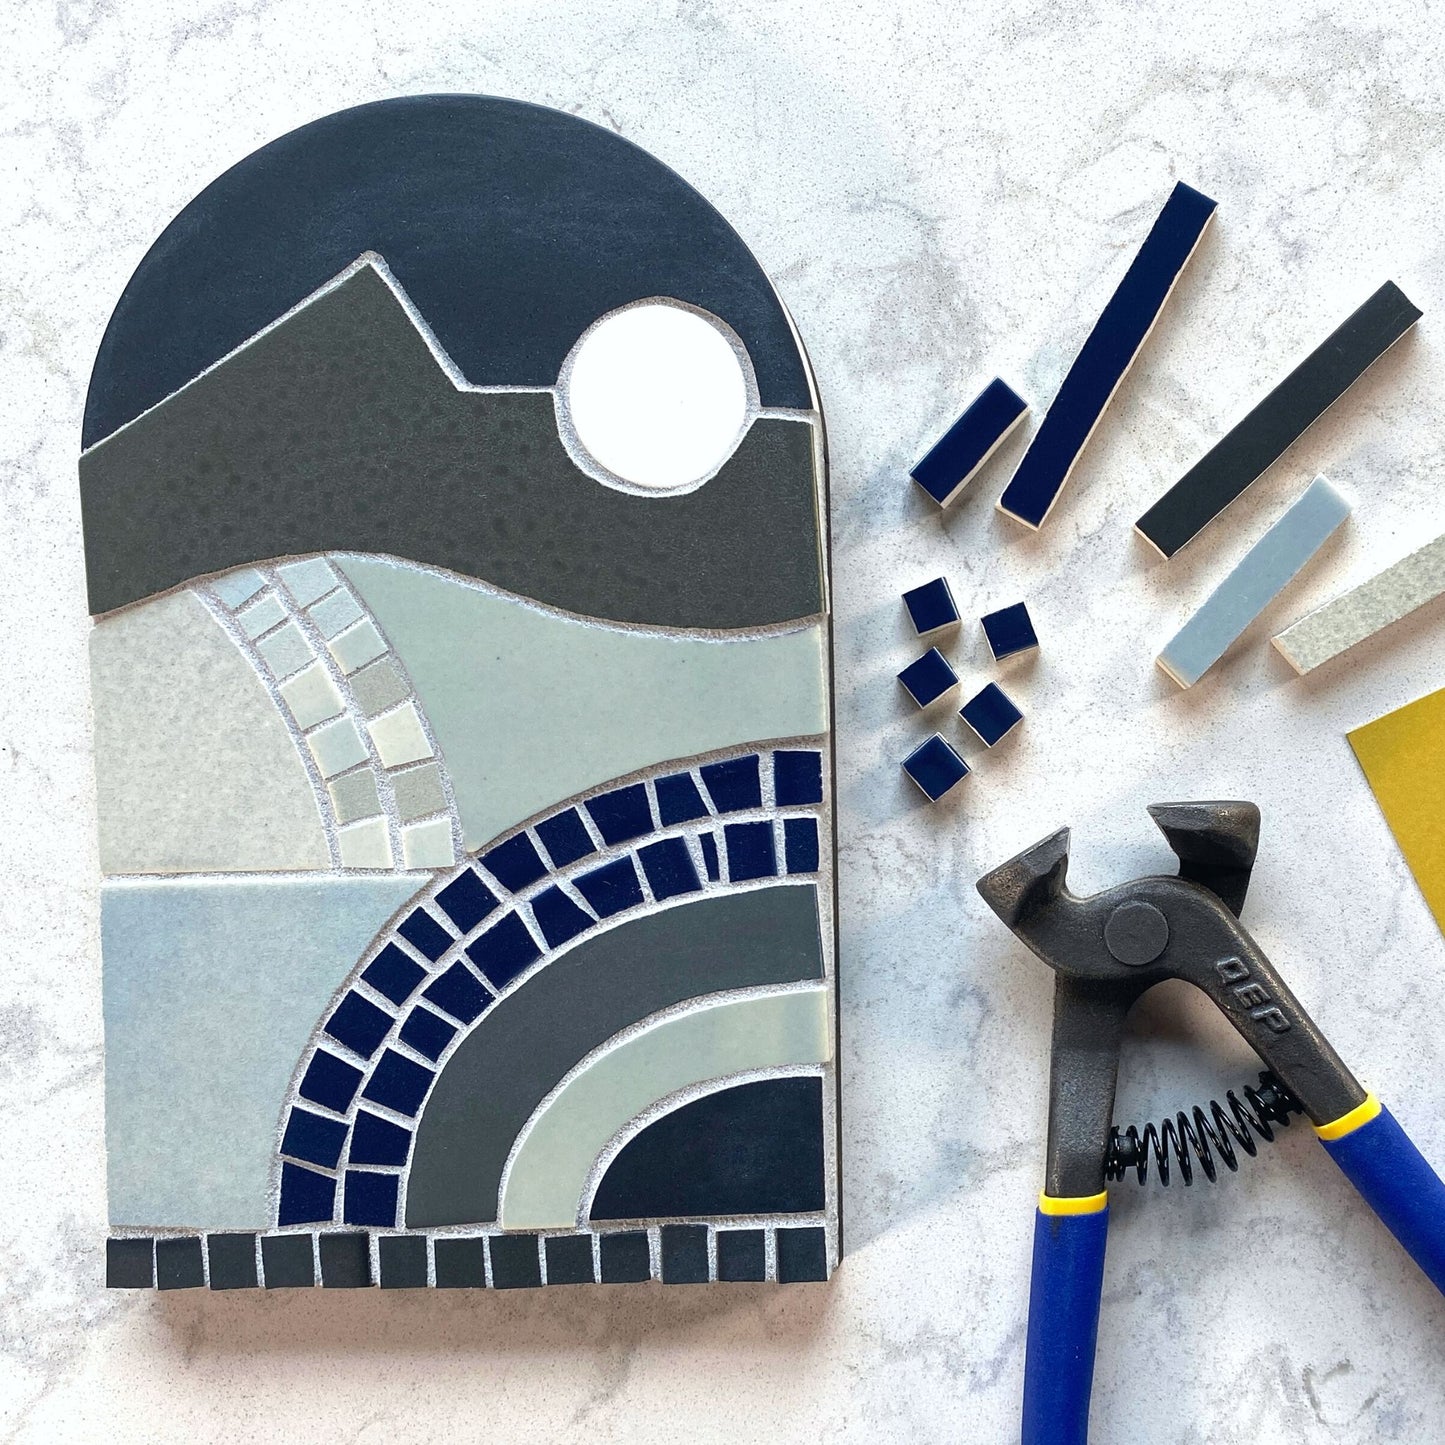 New Day - Nightfall mosaic kit with tile nippers